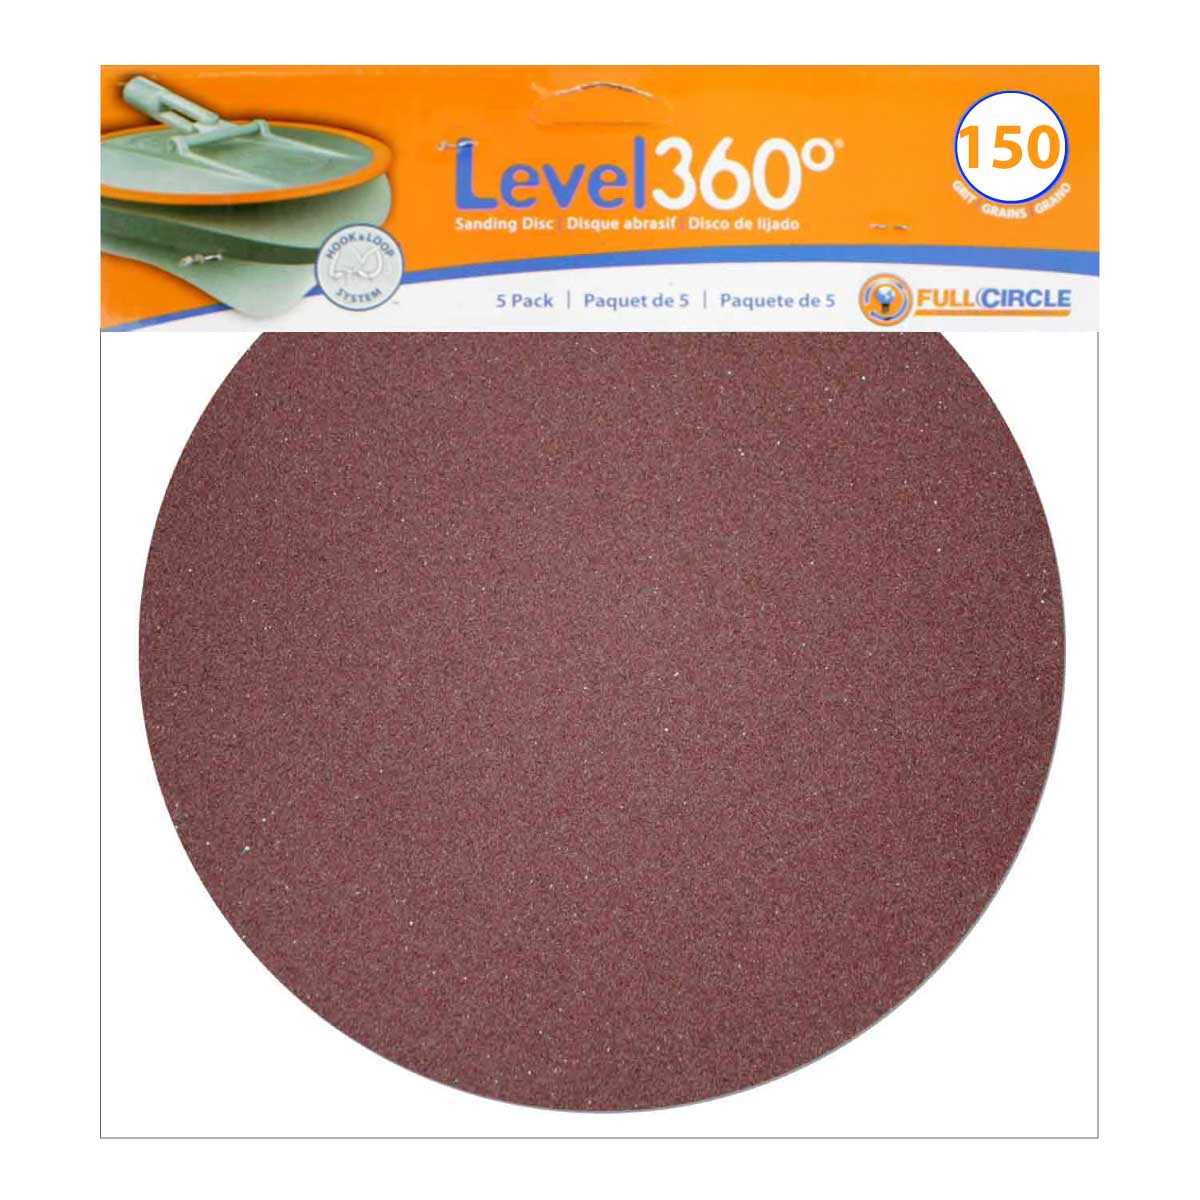 Full Circle International Inc Level360 Sanding Disc 150 Grit for use with Radius360 sanding Tool or Drywall Power Sanding Tools SD150-5 8-3/4